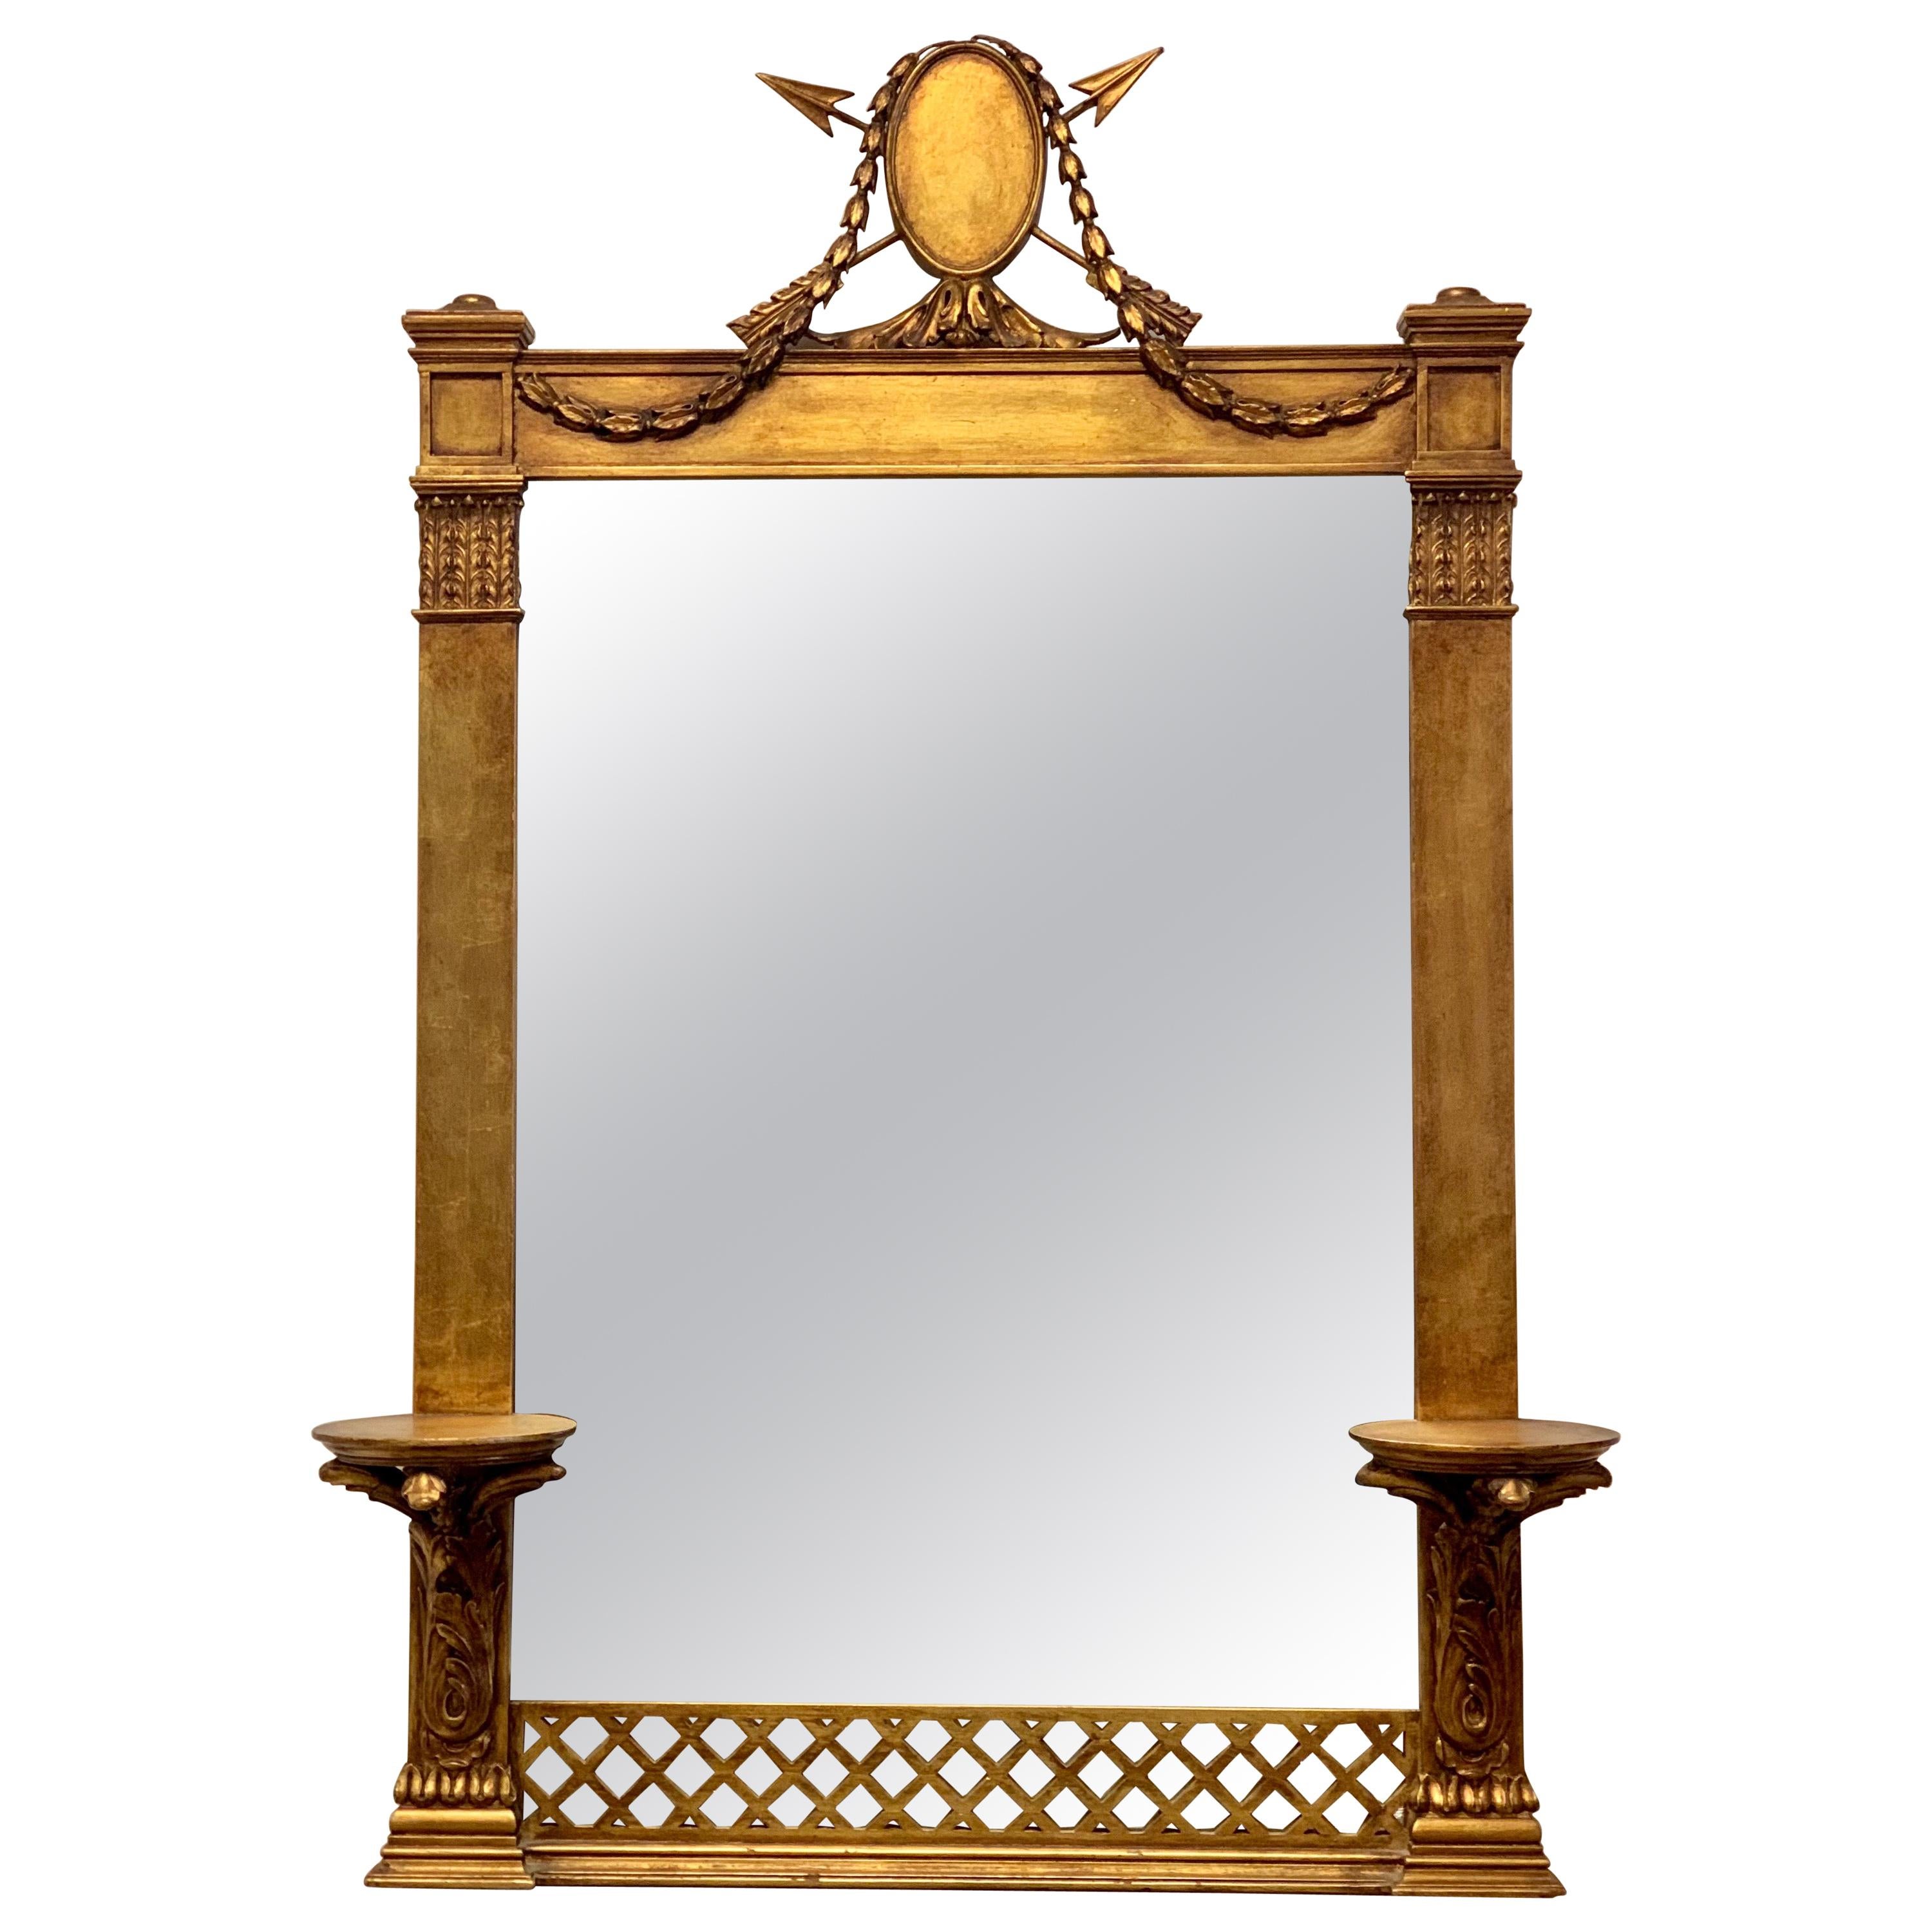 19th Century Italian Carved Giltwood Mirror with Wall Brackets Shelves